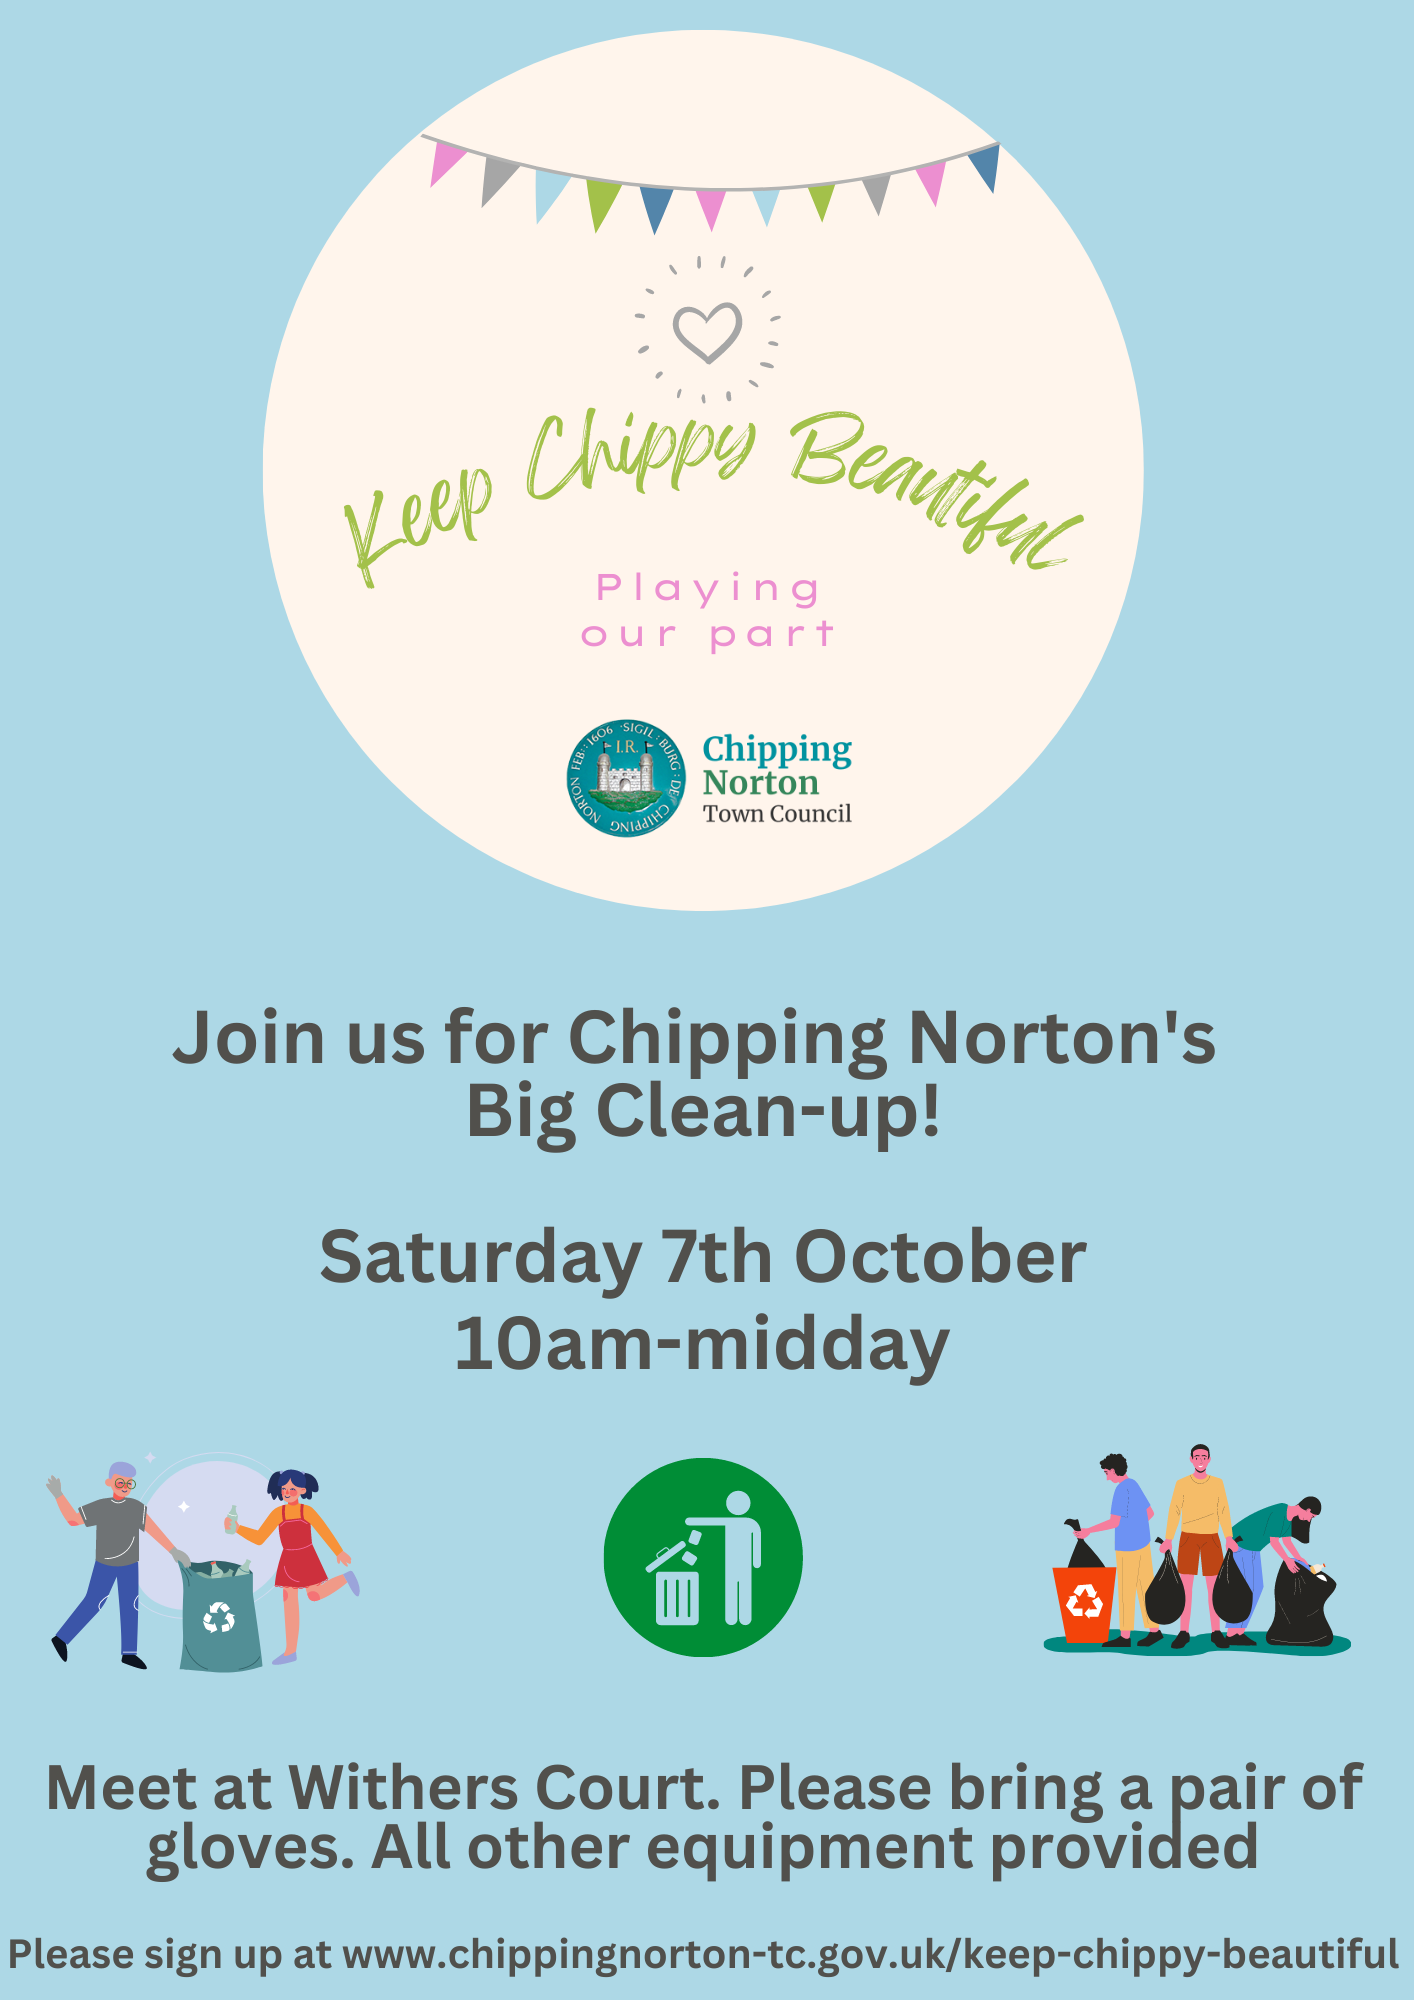 
Join us for Chipping Norton's 
Big Clean-up!

Saturday 7th October
10am-midday




Meet at Withers Court. Please bring a pair of gloves. All other equipment provided

Please sign up at www.chippingnorton-tc.gov.uk/keep-chippy-beautiful